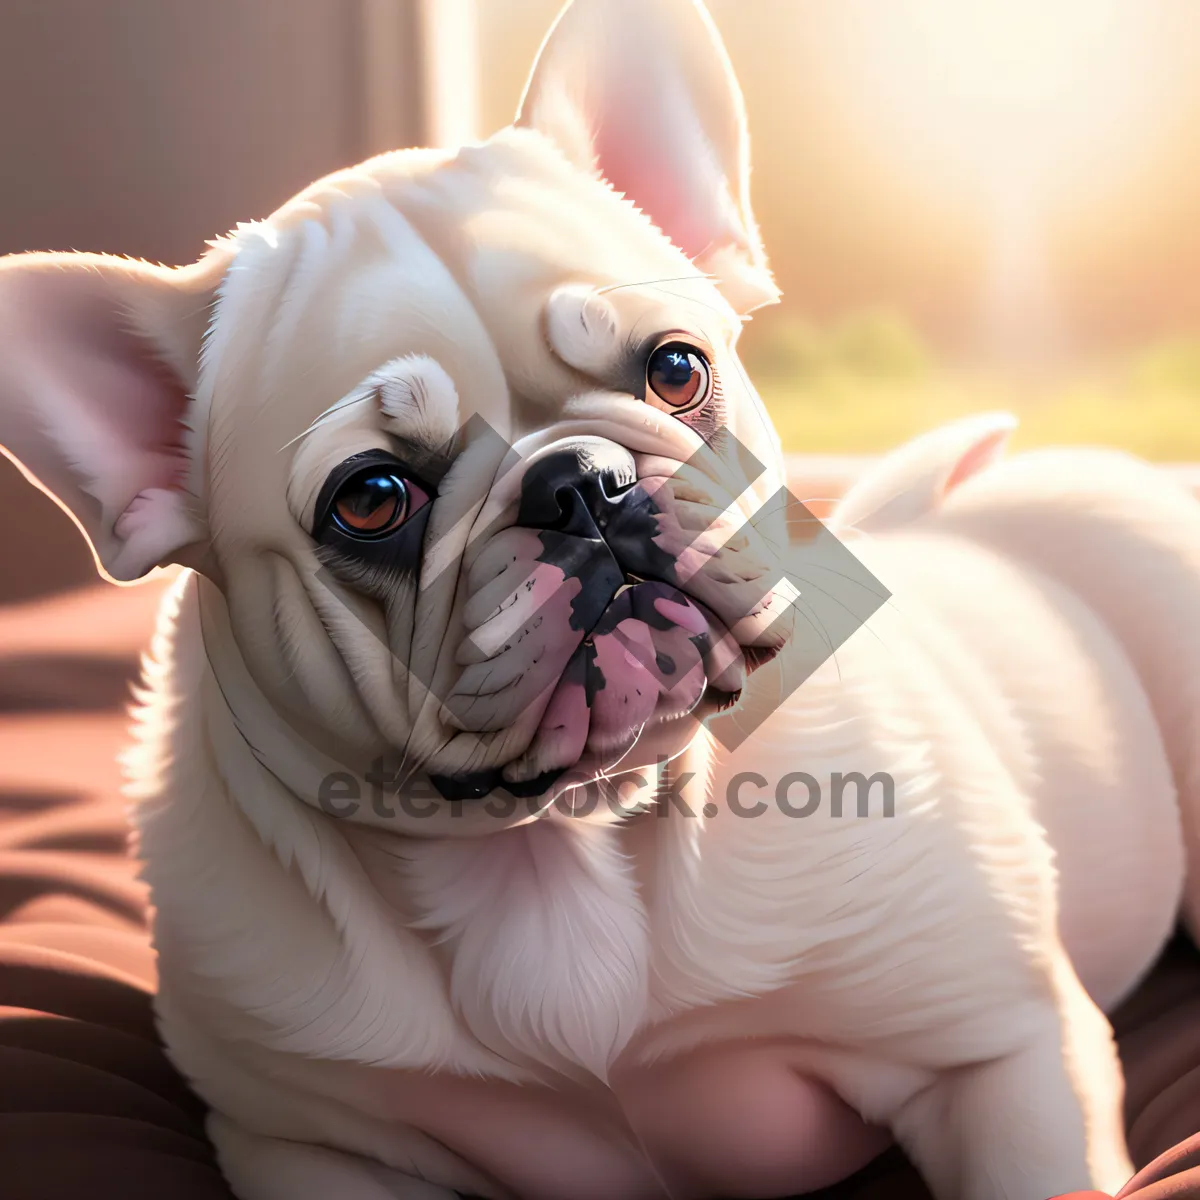 Picture of Endearing bulldog puppy with an adorable wrinkled face